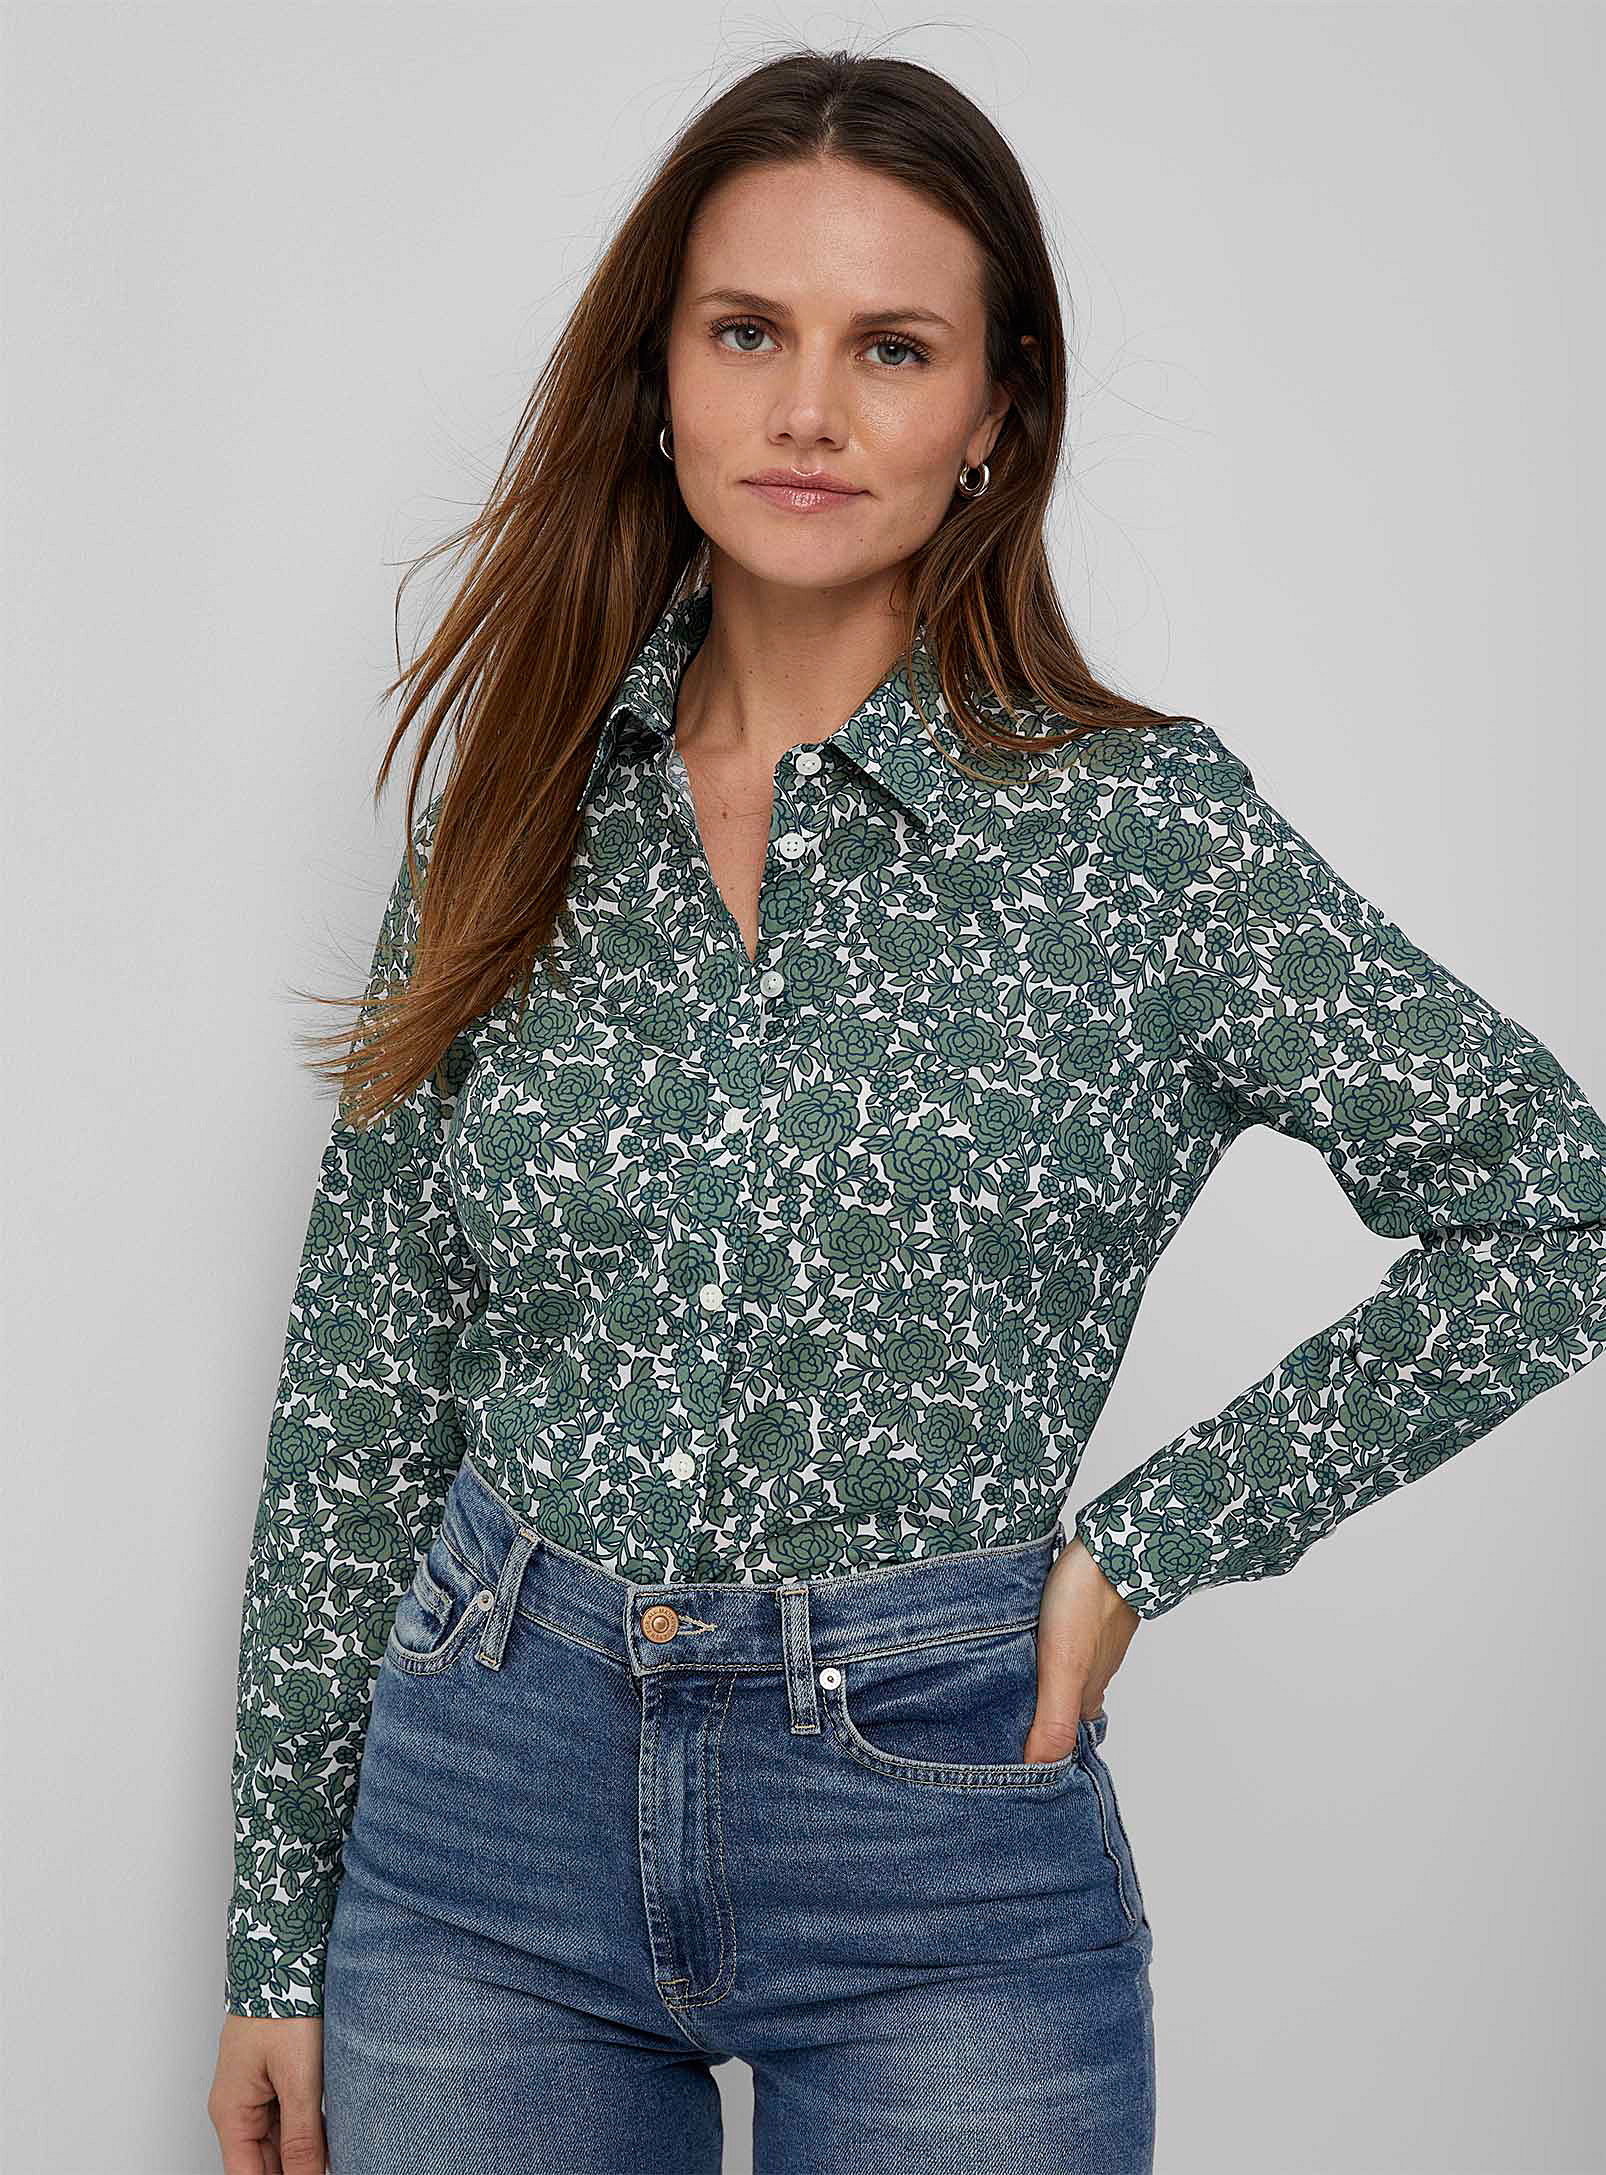 Contemporaine Silky Blooming Shirt Made With Liberty Fabric In Kelly Green